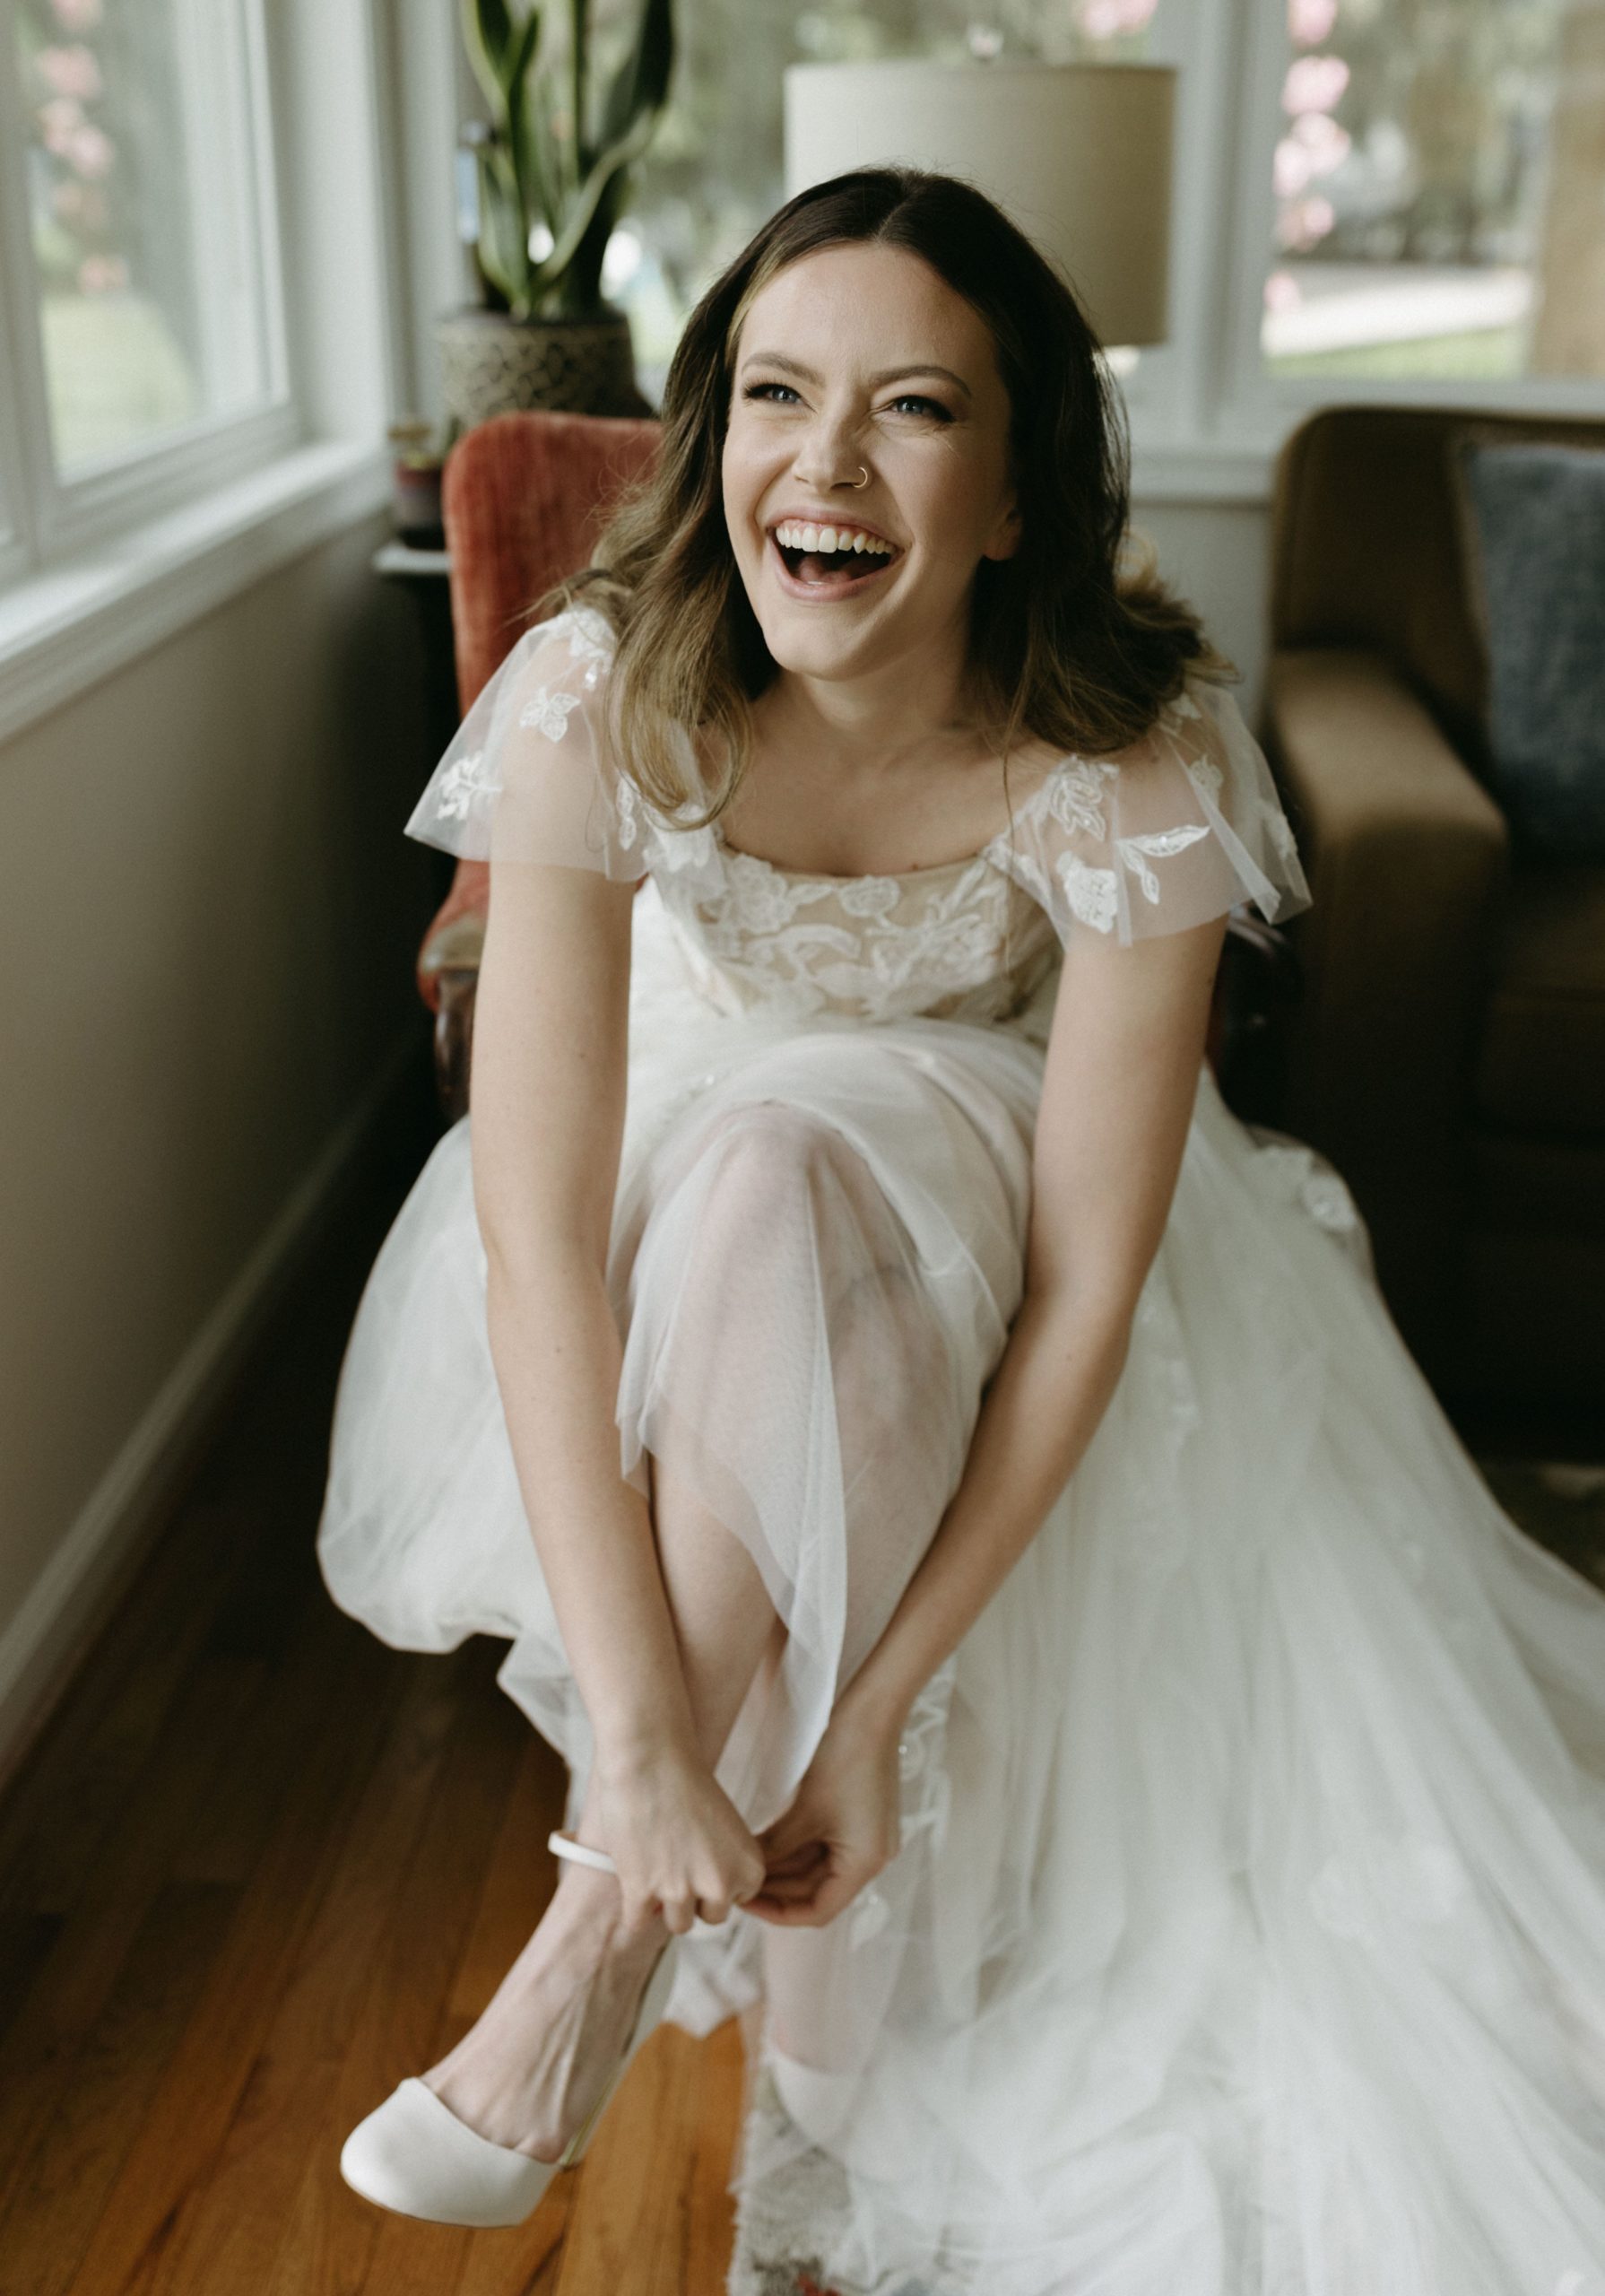 9 Tips for Getting Ready on Your Wedding Day | DC Wedding Photographer